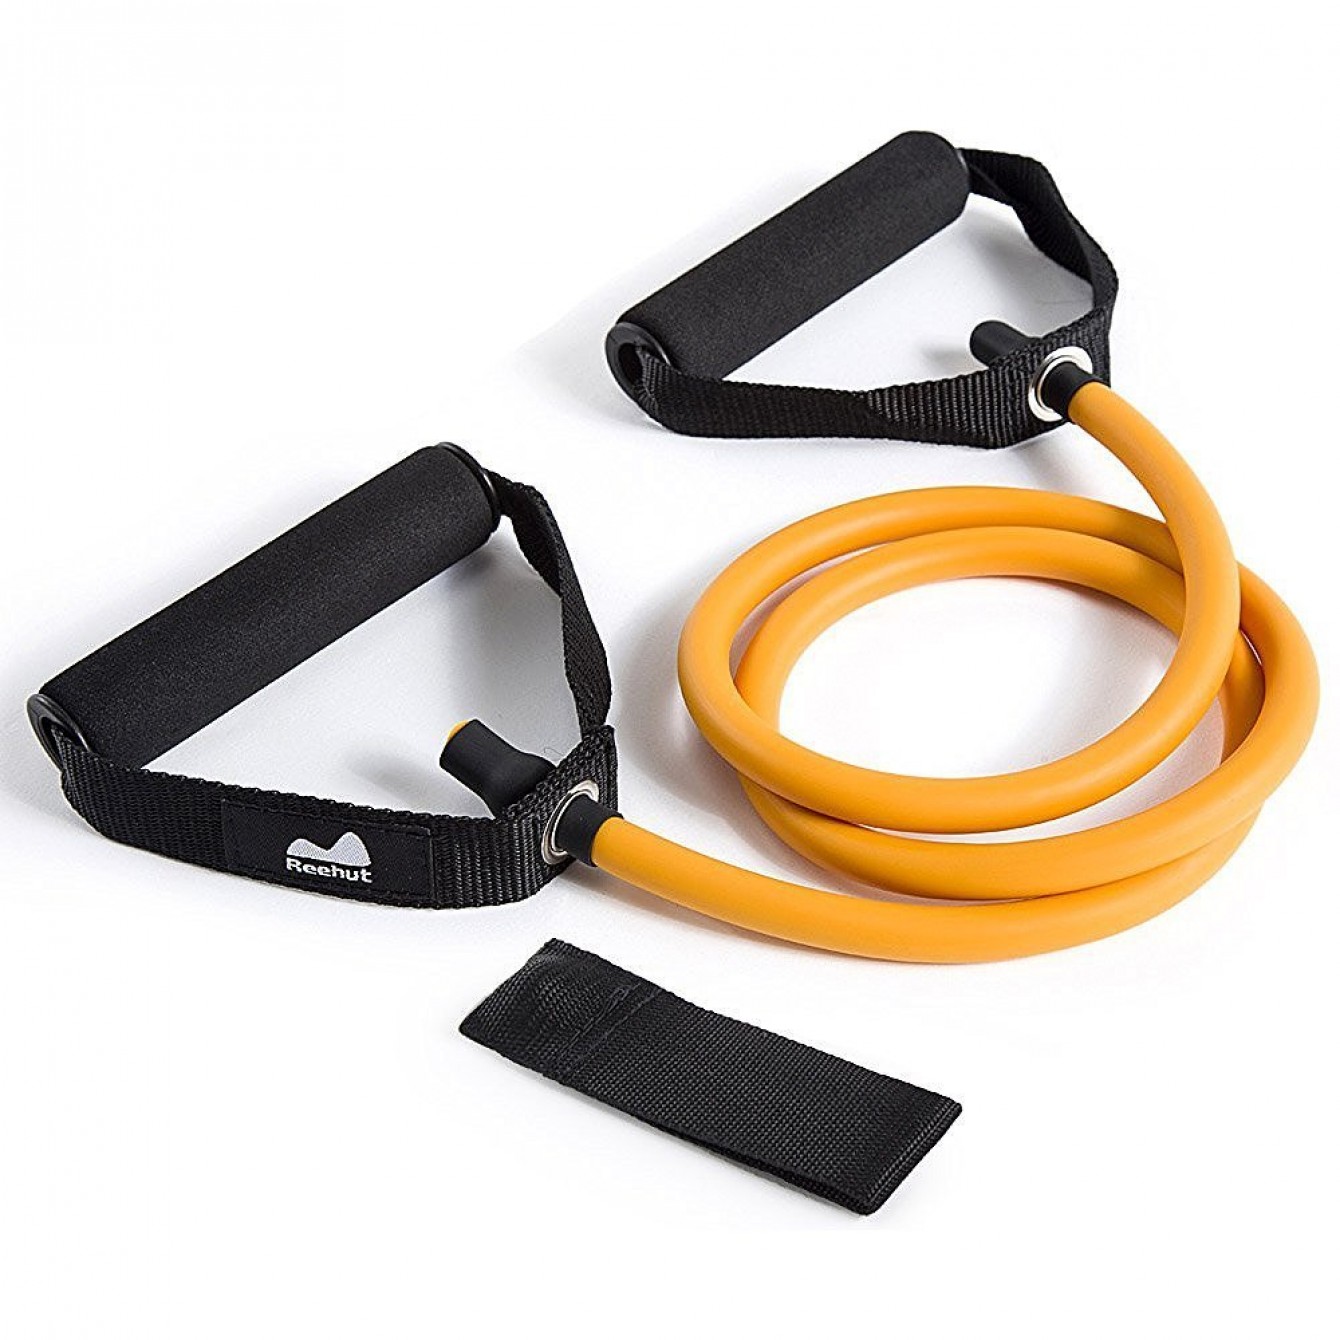 single resistance band exercise tube black contract manufacturing